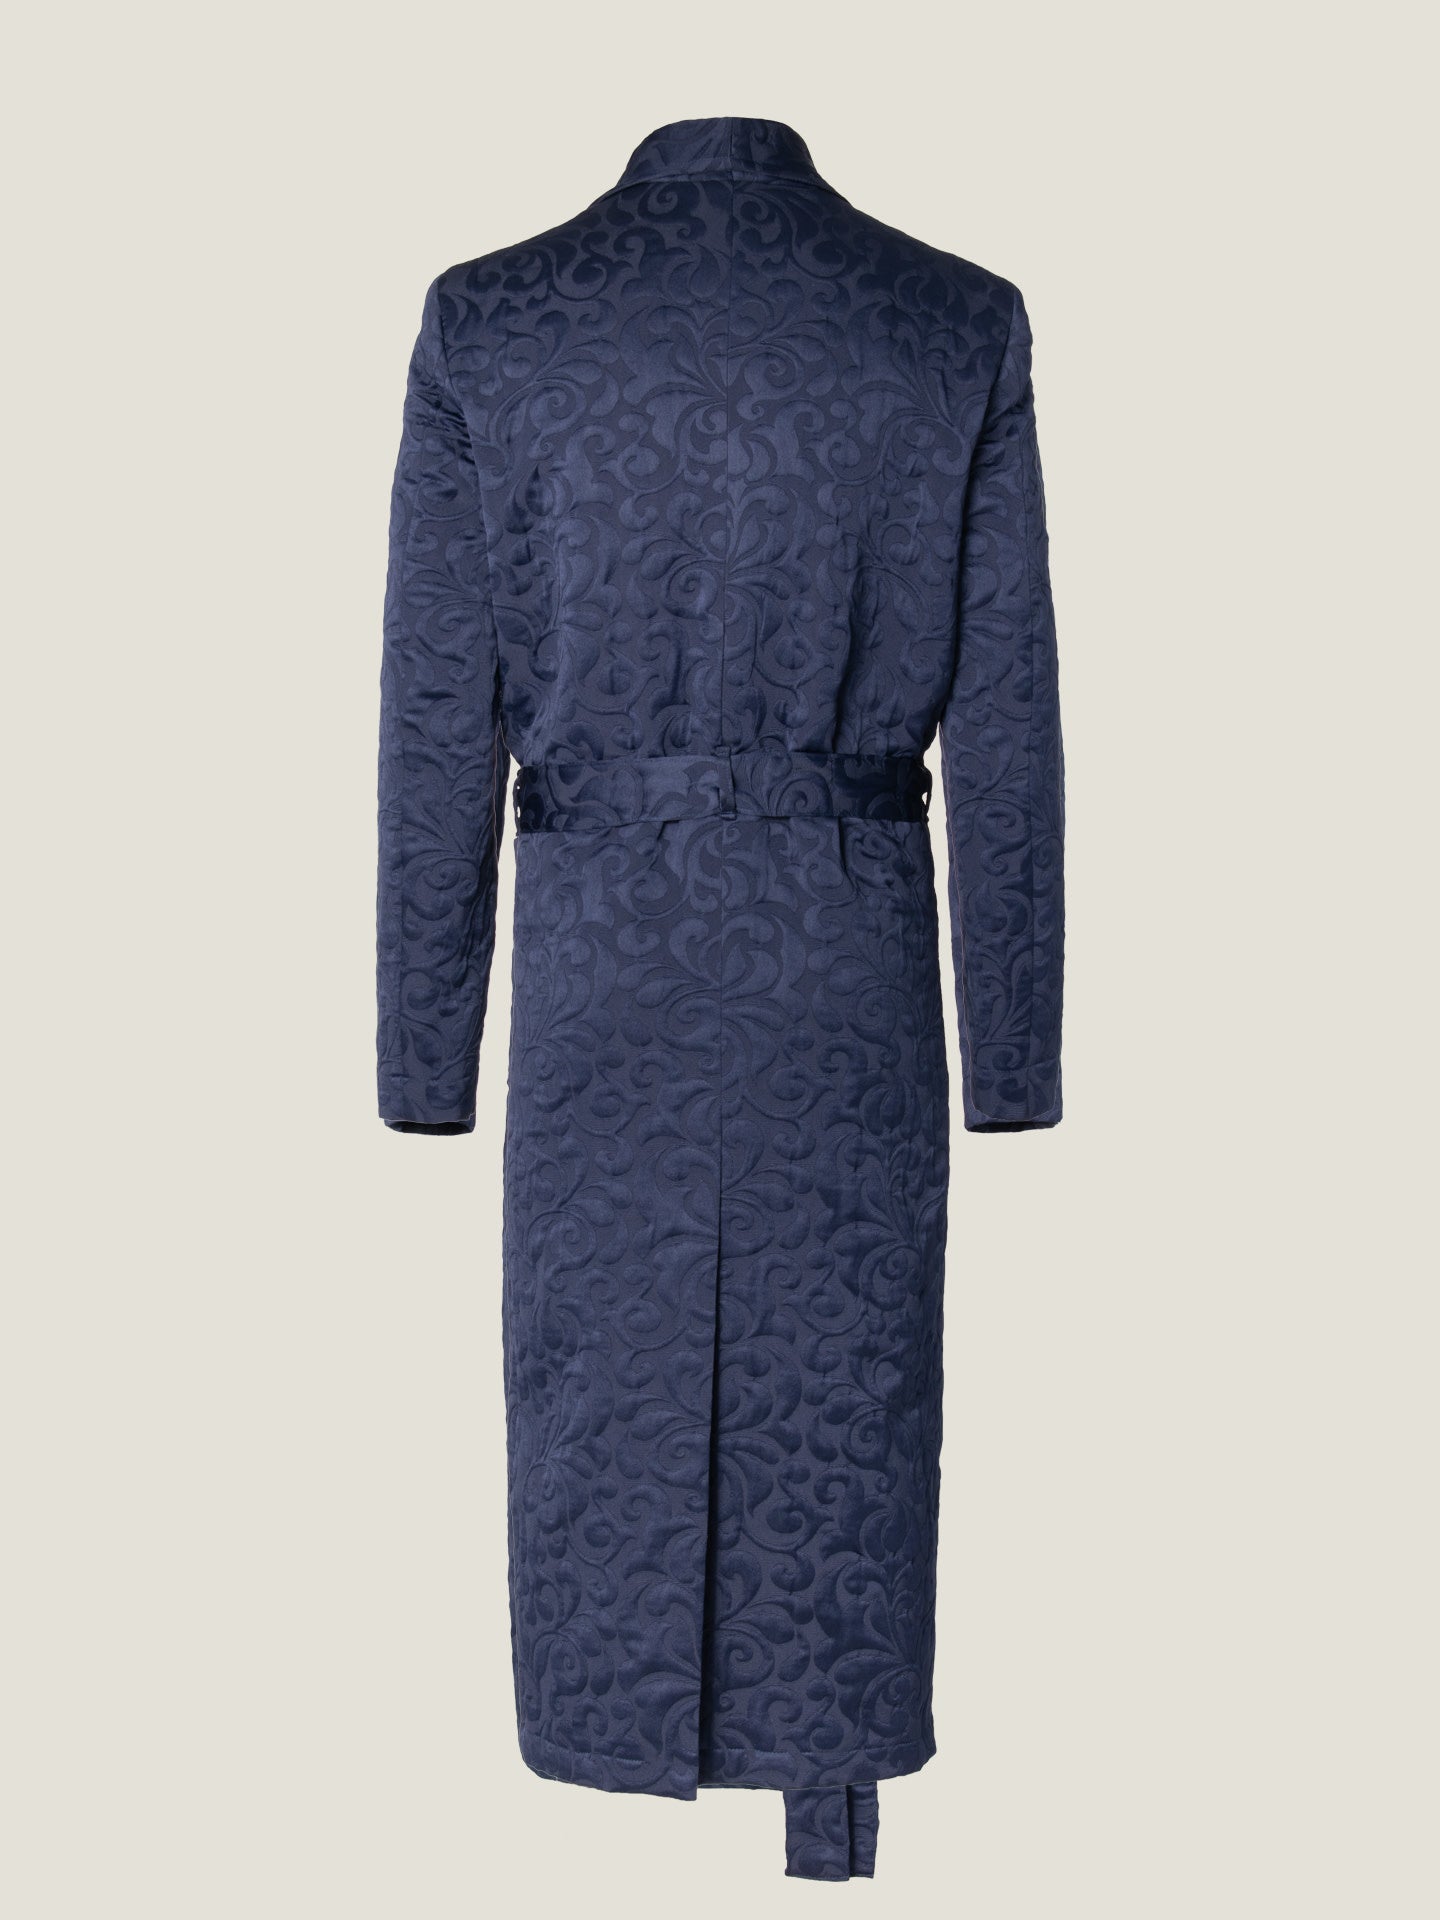 Farlow Dressing Gown